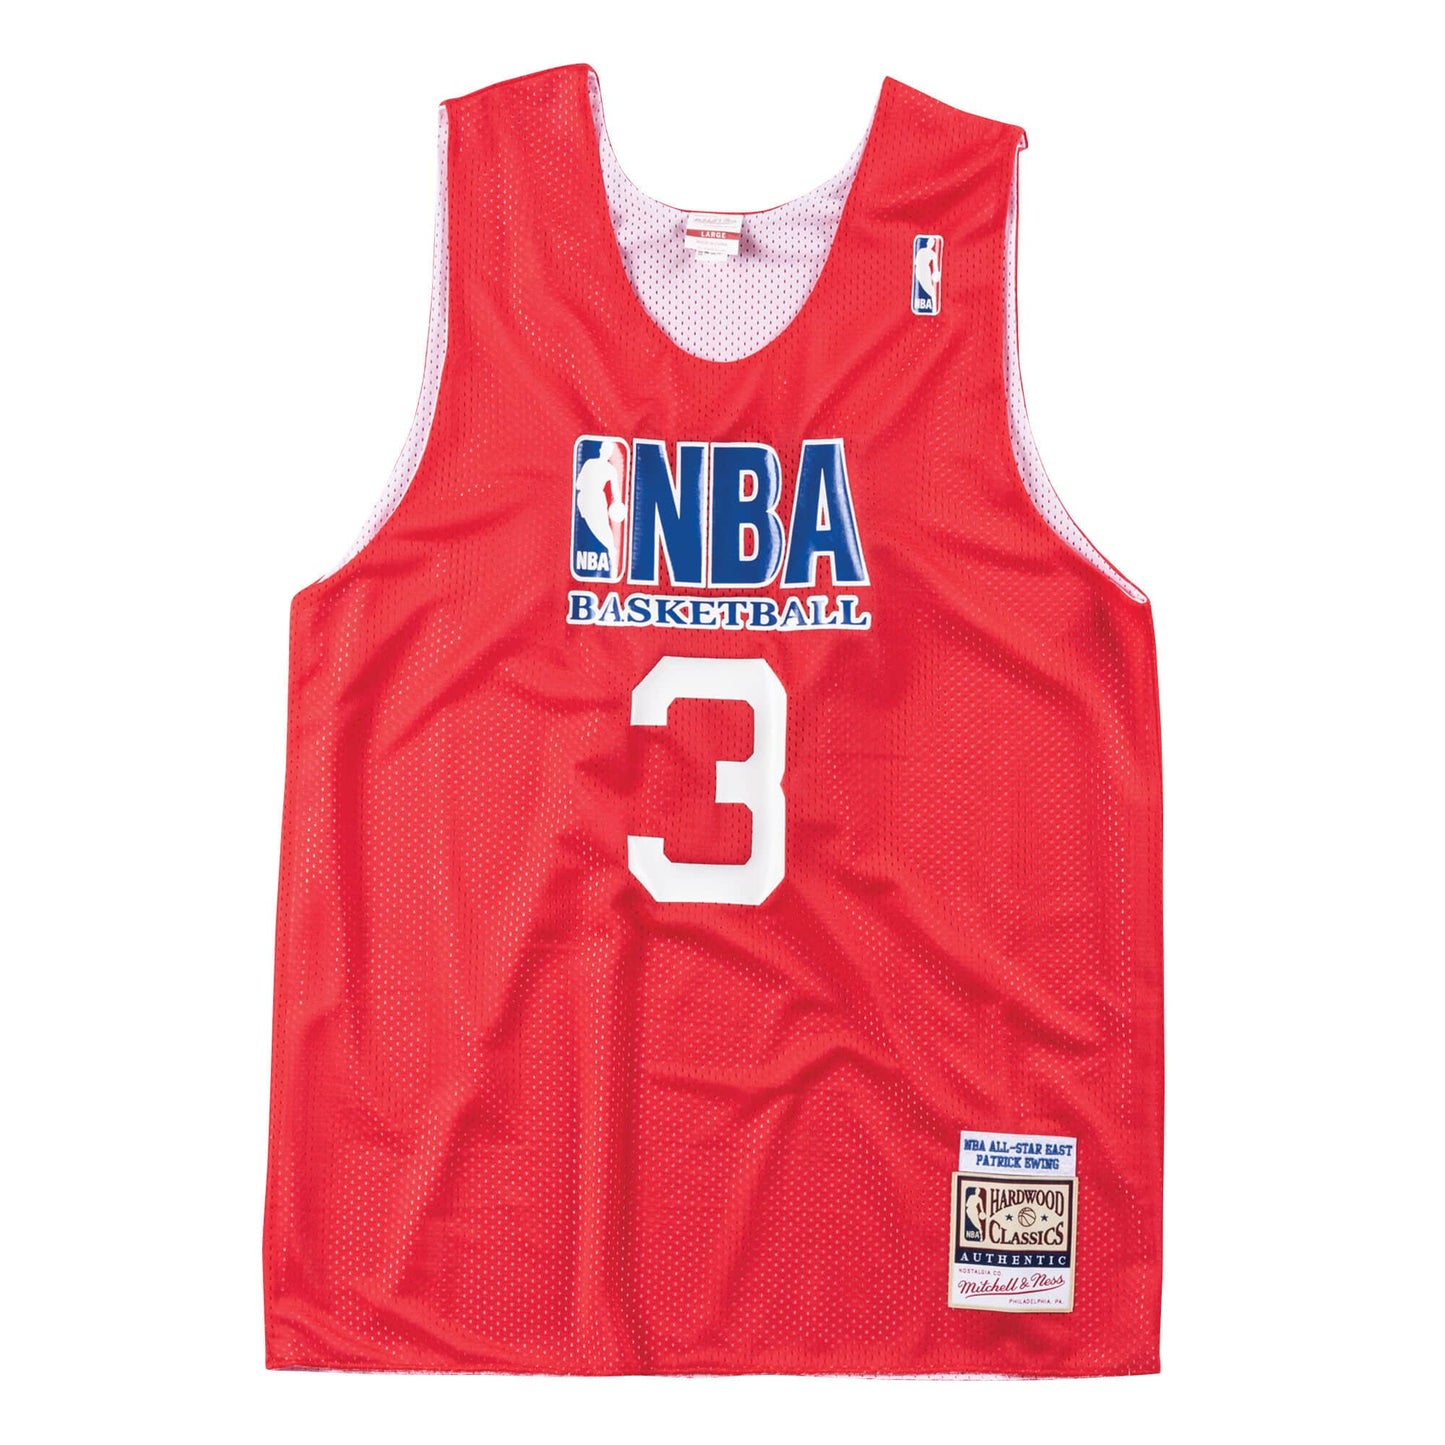 NBA Authentic Practice Jersey All Star East 1991 Patrick Ewing